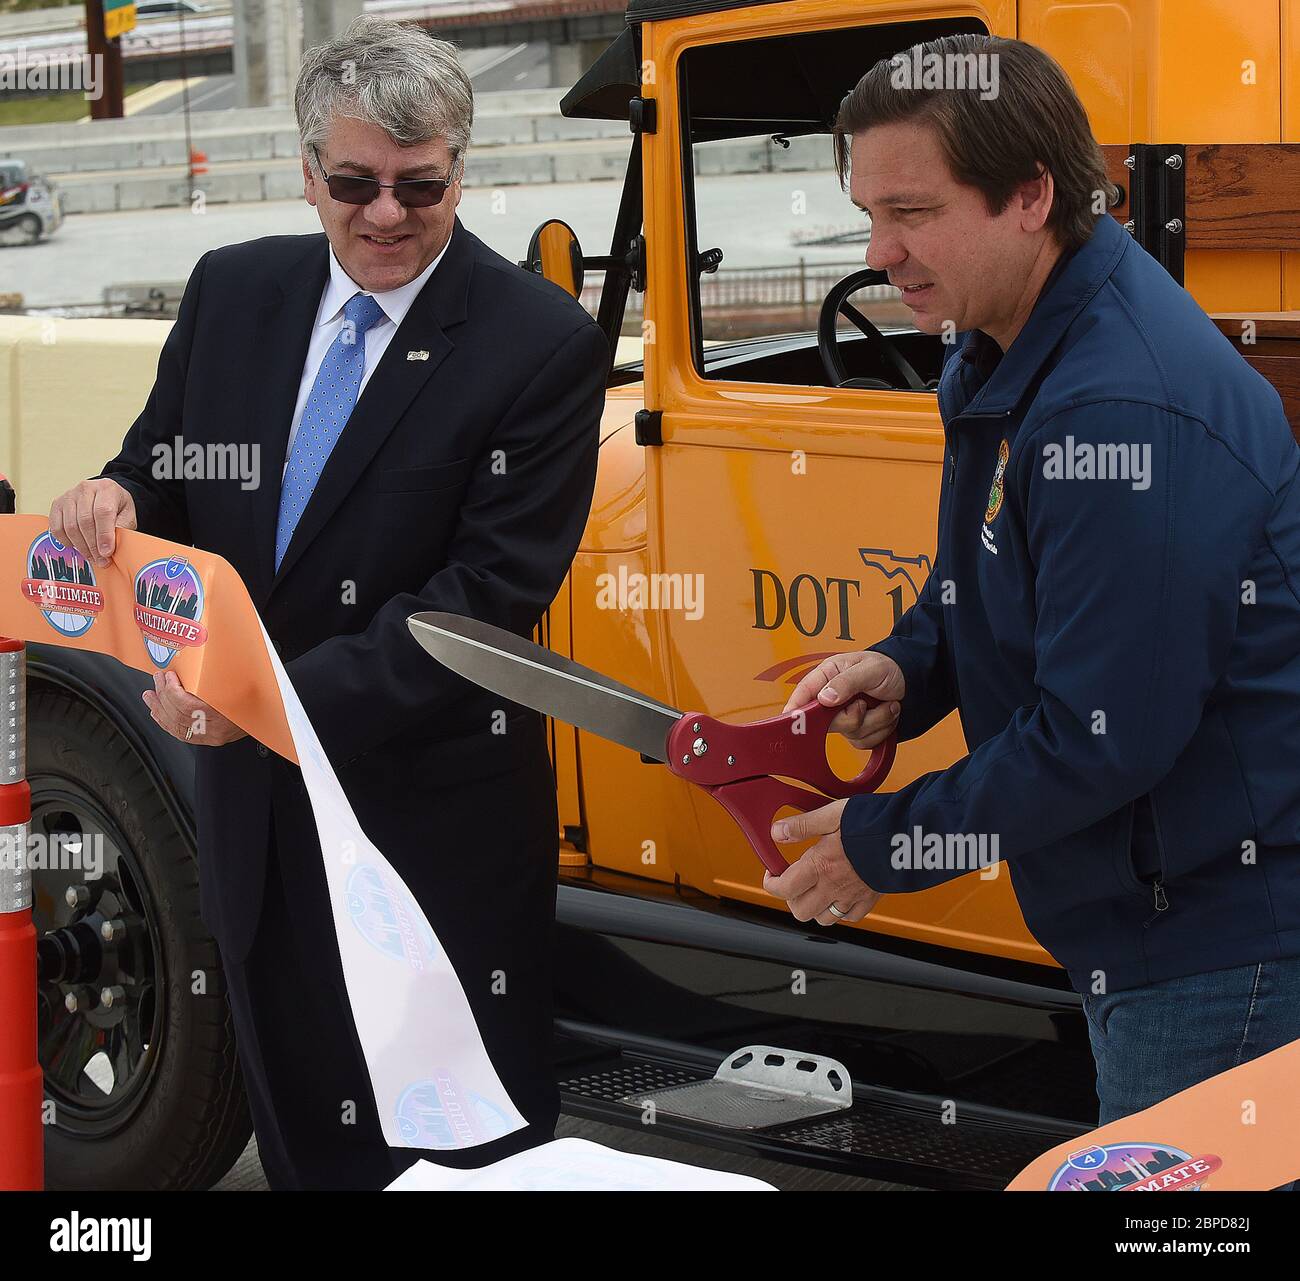 May 18, 2020 - Orlando, Florida, United States - Florida Department of Transportation Secretary Kevin Thibault (left) looks on as Gov. Ron DeSantis cuts the ribbon on the newly completed I-4 and State Road 408 interchange which will open to traffic tonight in downtown Orlando, Florida. DeSantis explained at a news conference that progress on the 21-mile I-4 Ultimate Project was expedited at his direction due to the decrease in traffic during the coronavirus crisis. (Paul Hennessy/Alamy) Stock Photo